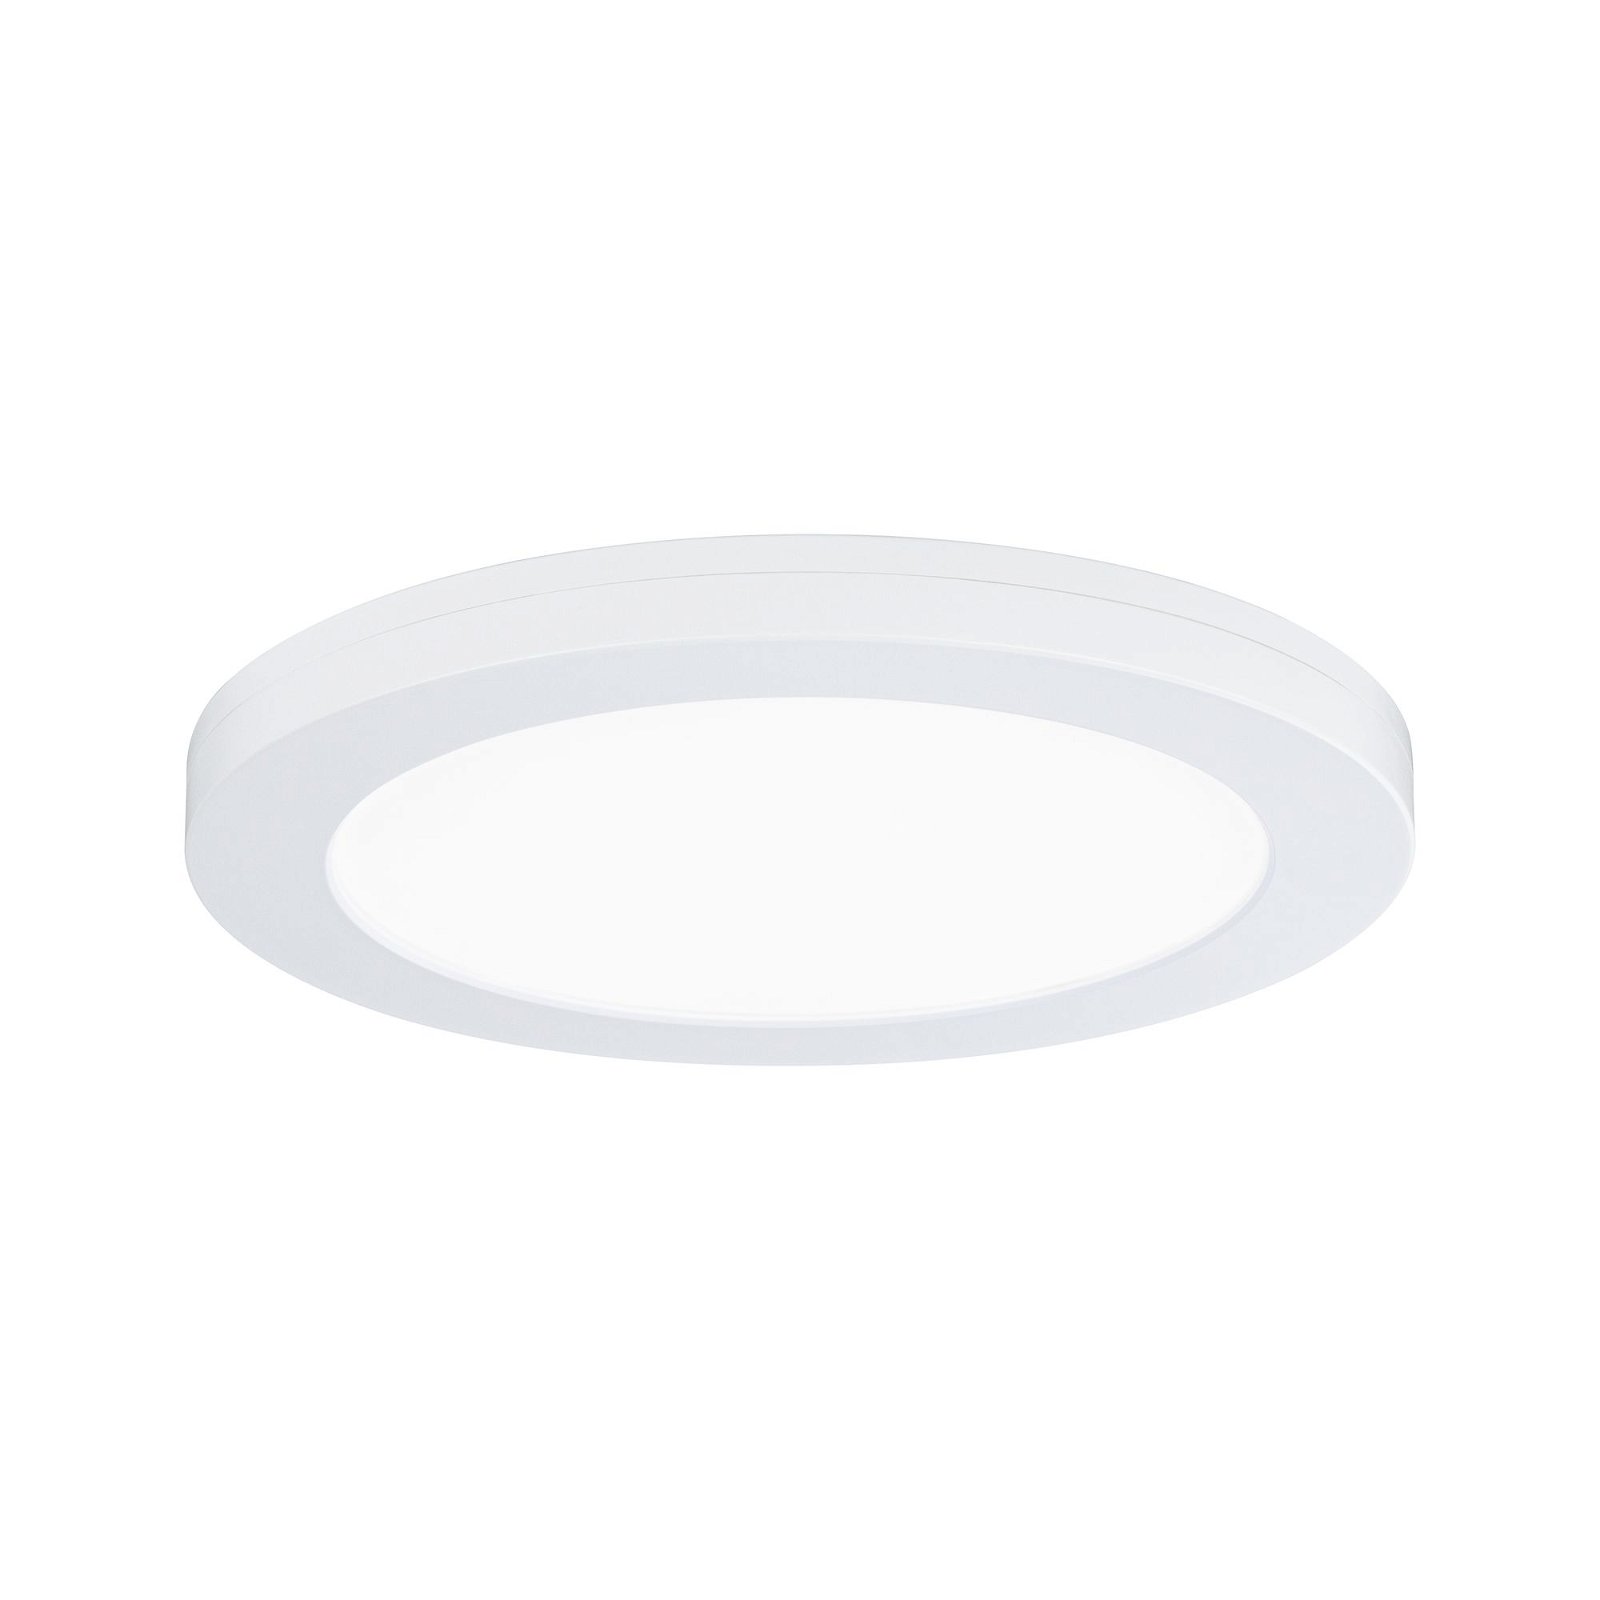 LED-inbouwpaneel 2in1 Cover-it rond 225mm 1200lm 4000K Wit mat